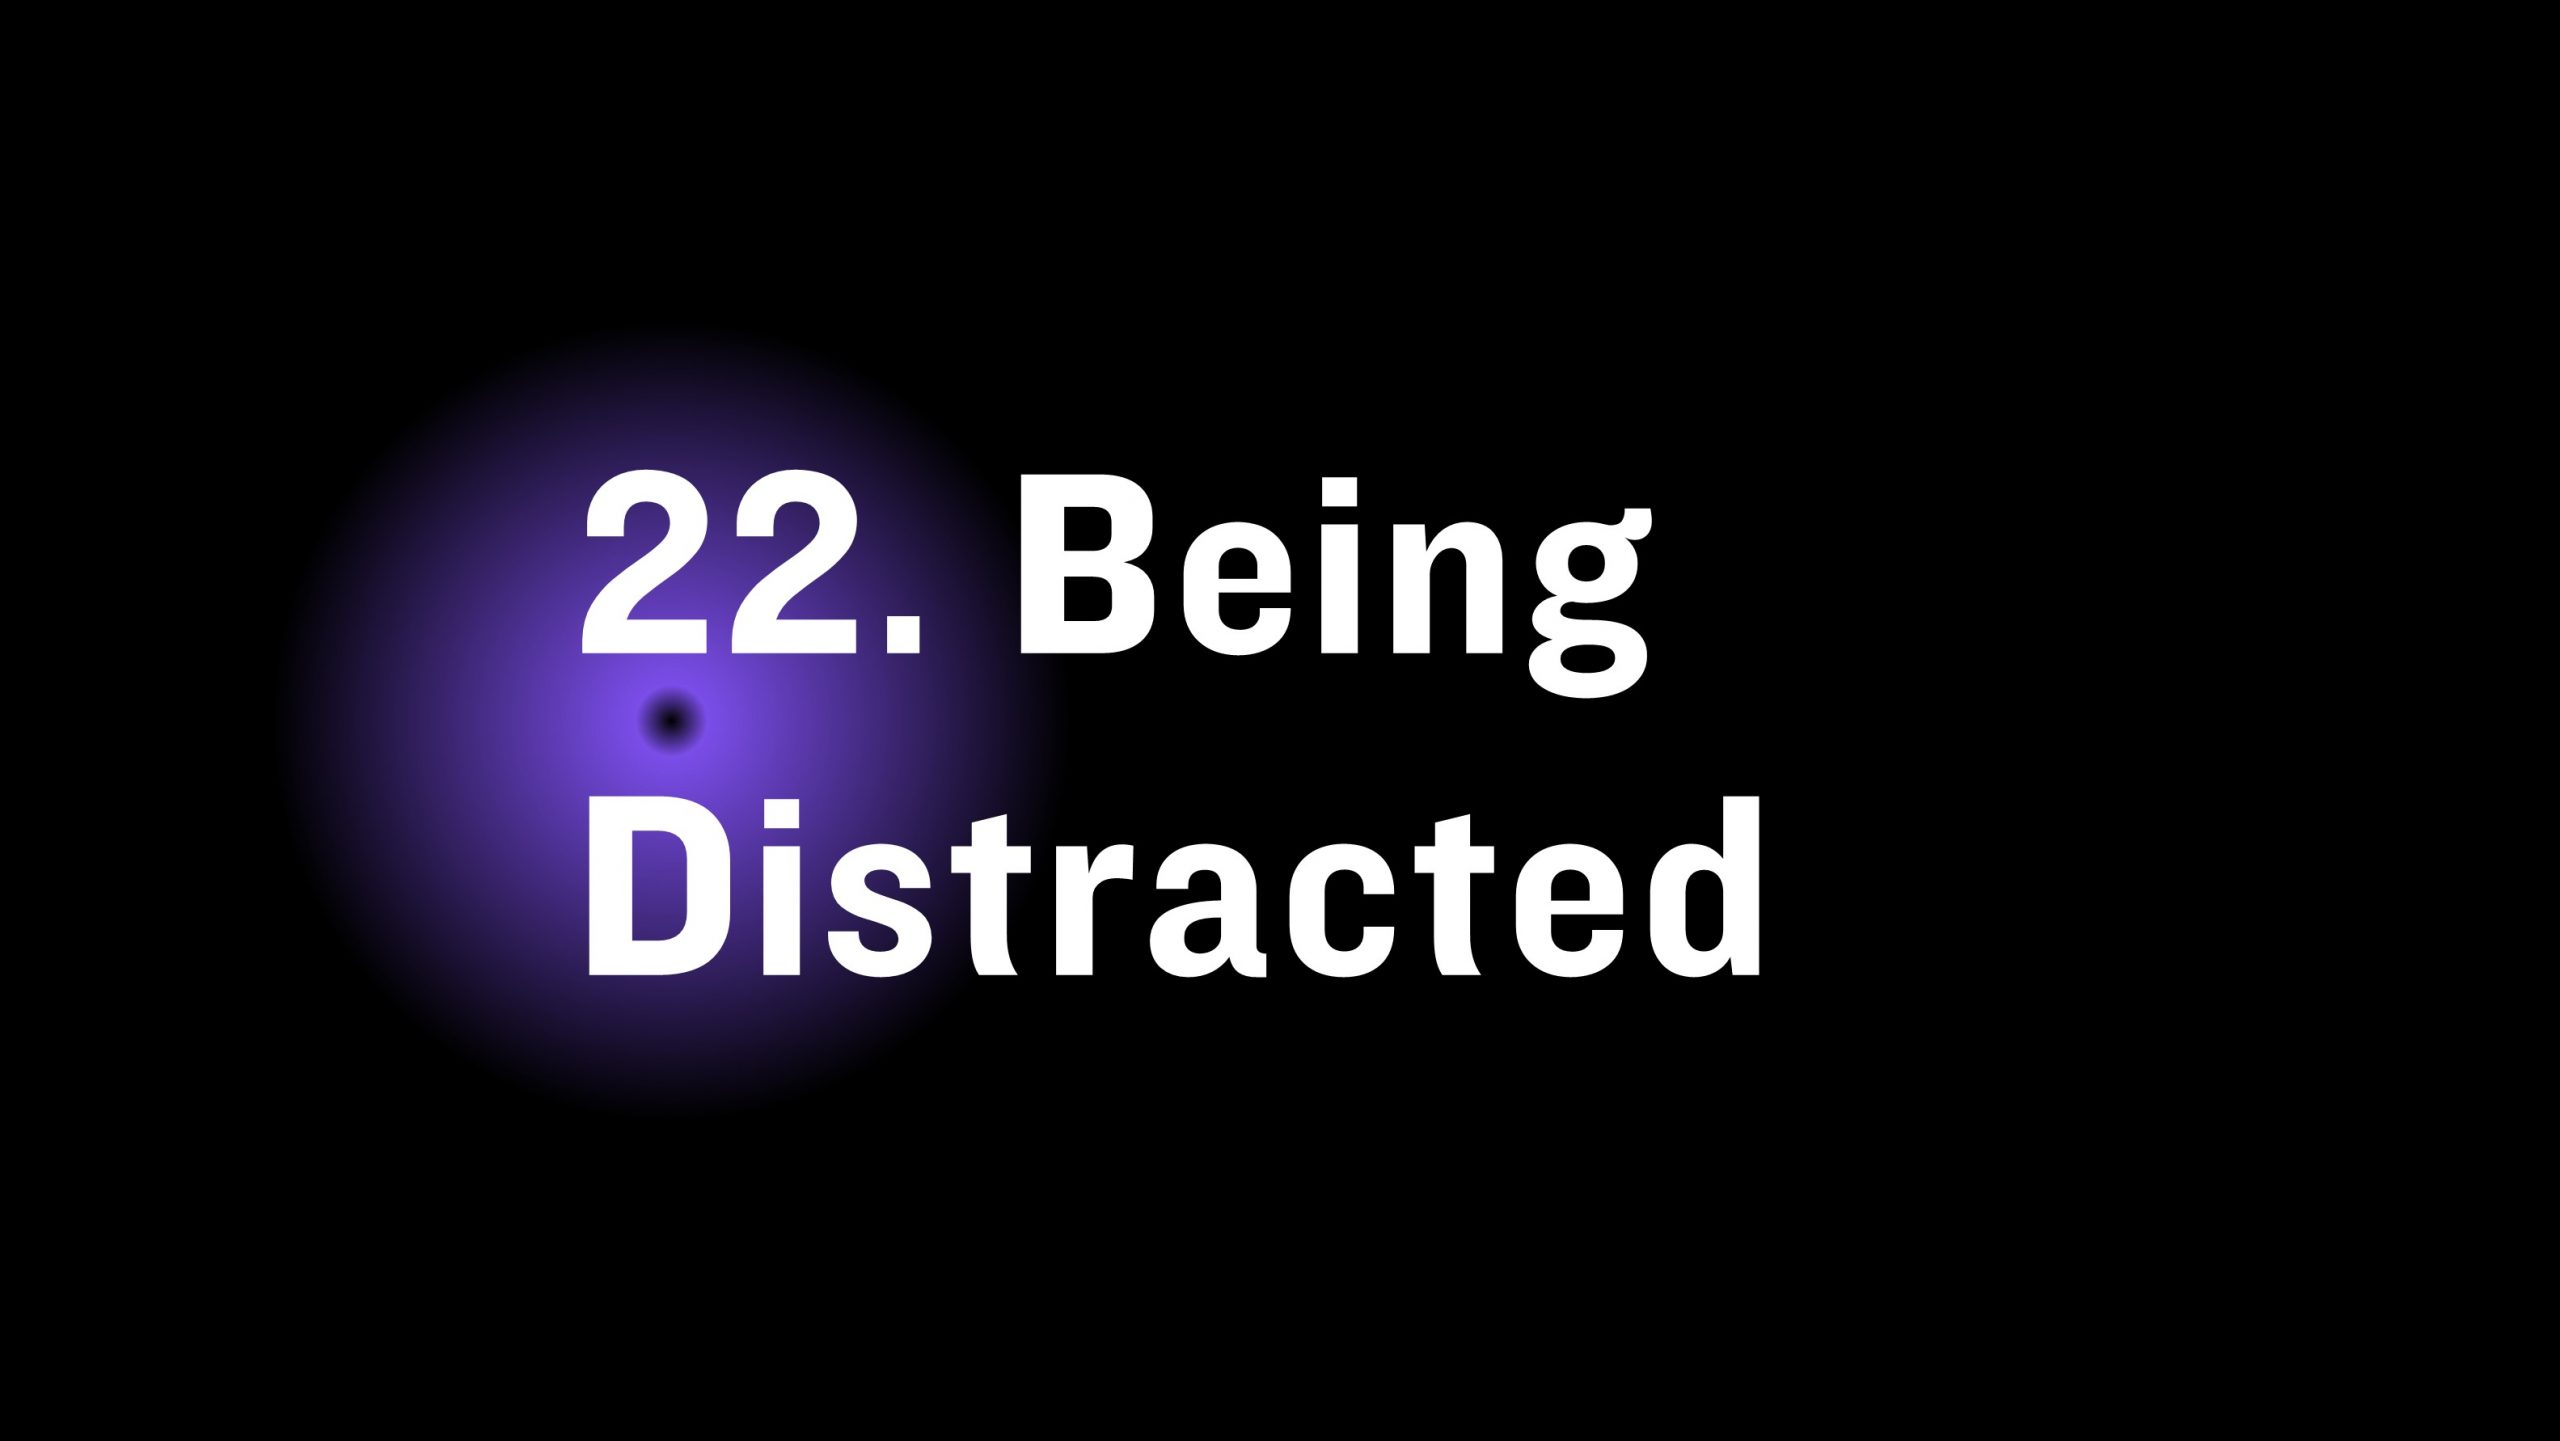 Being distracted